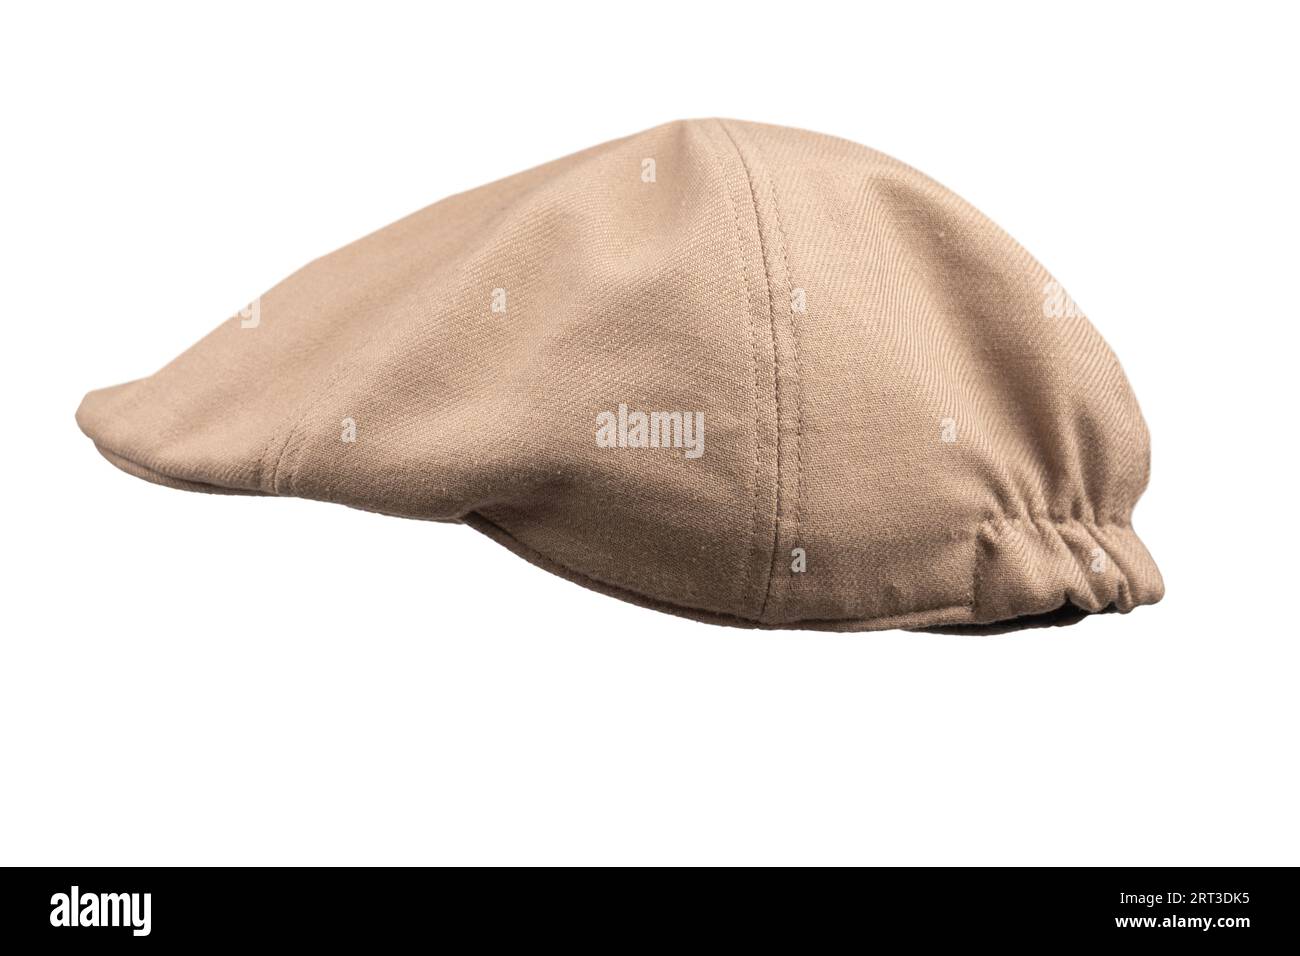 Light brown ascot cap isolated on a white background. Stock Photo